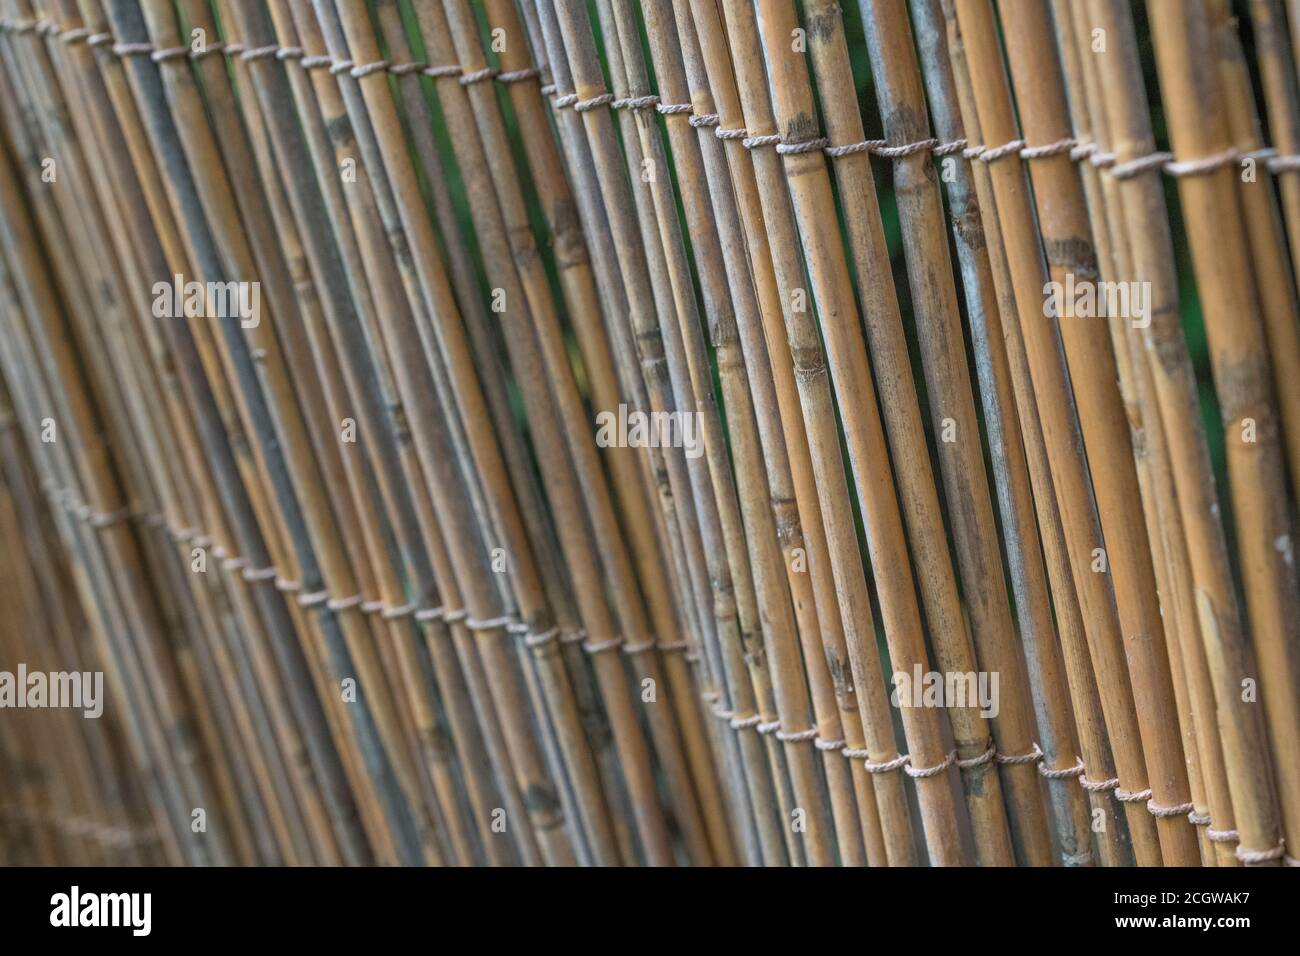 Upright section of natural reed garden screening, showing traces of early reed decay. Nice natural texture background or metaphor for gardening. Stock Photo